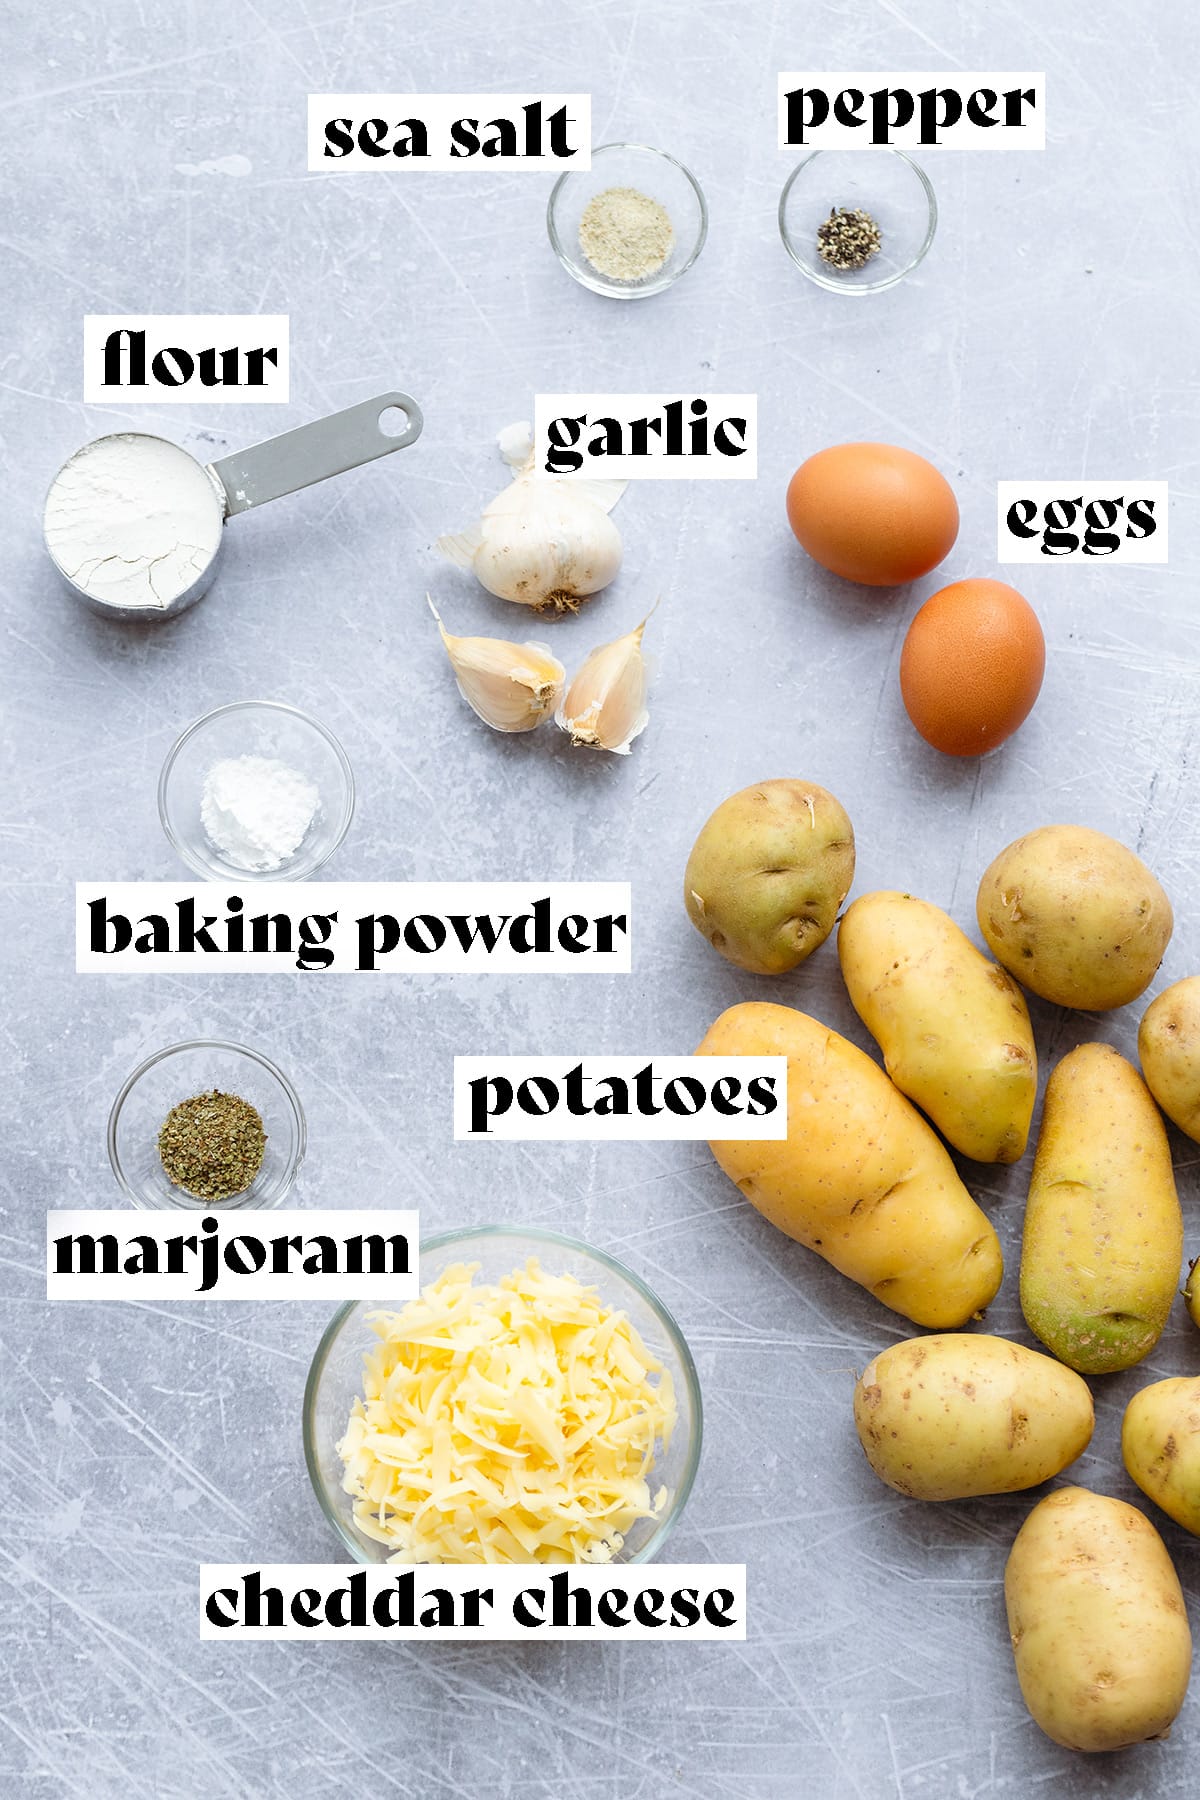 Ingredients for hash brown waffles laid out on a scratched metal surface.